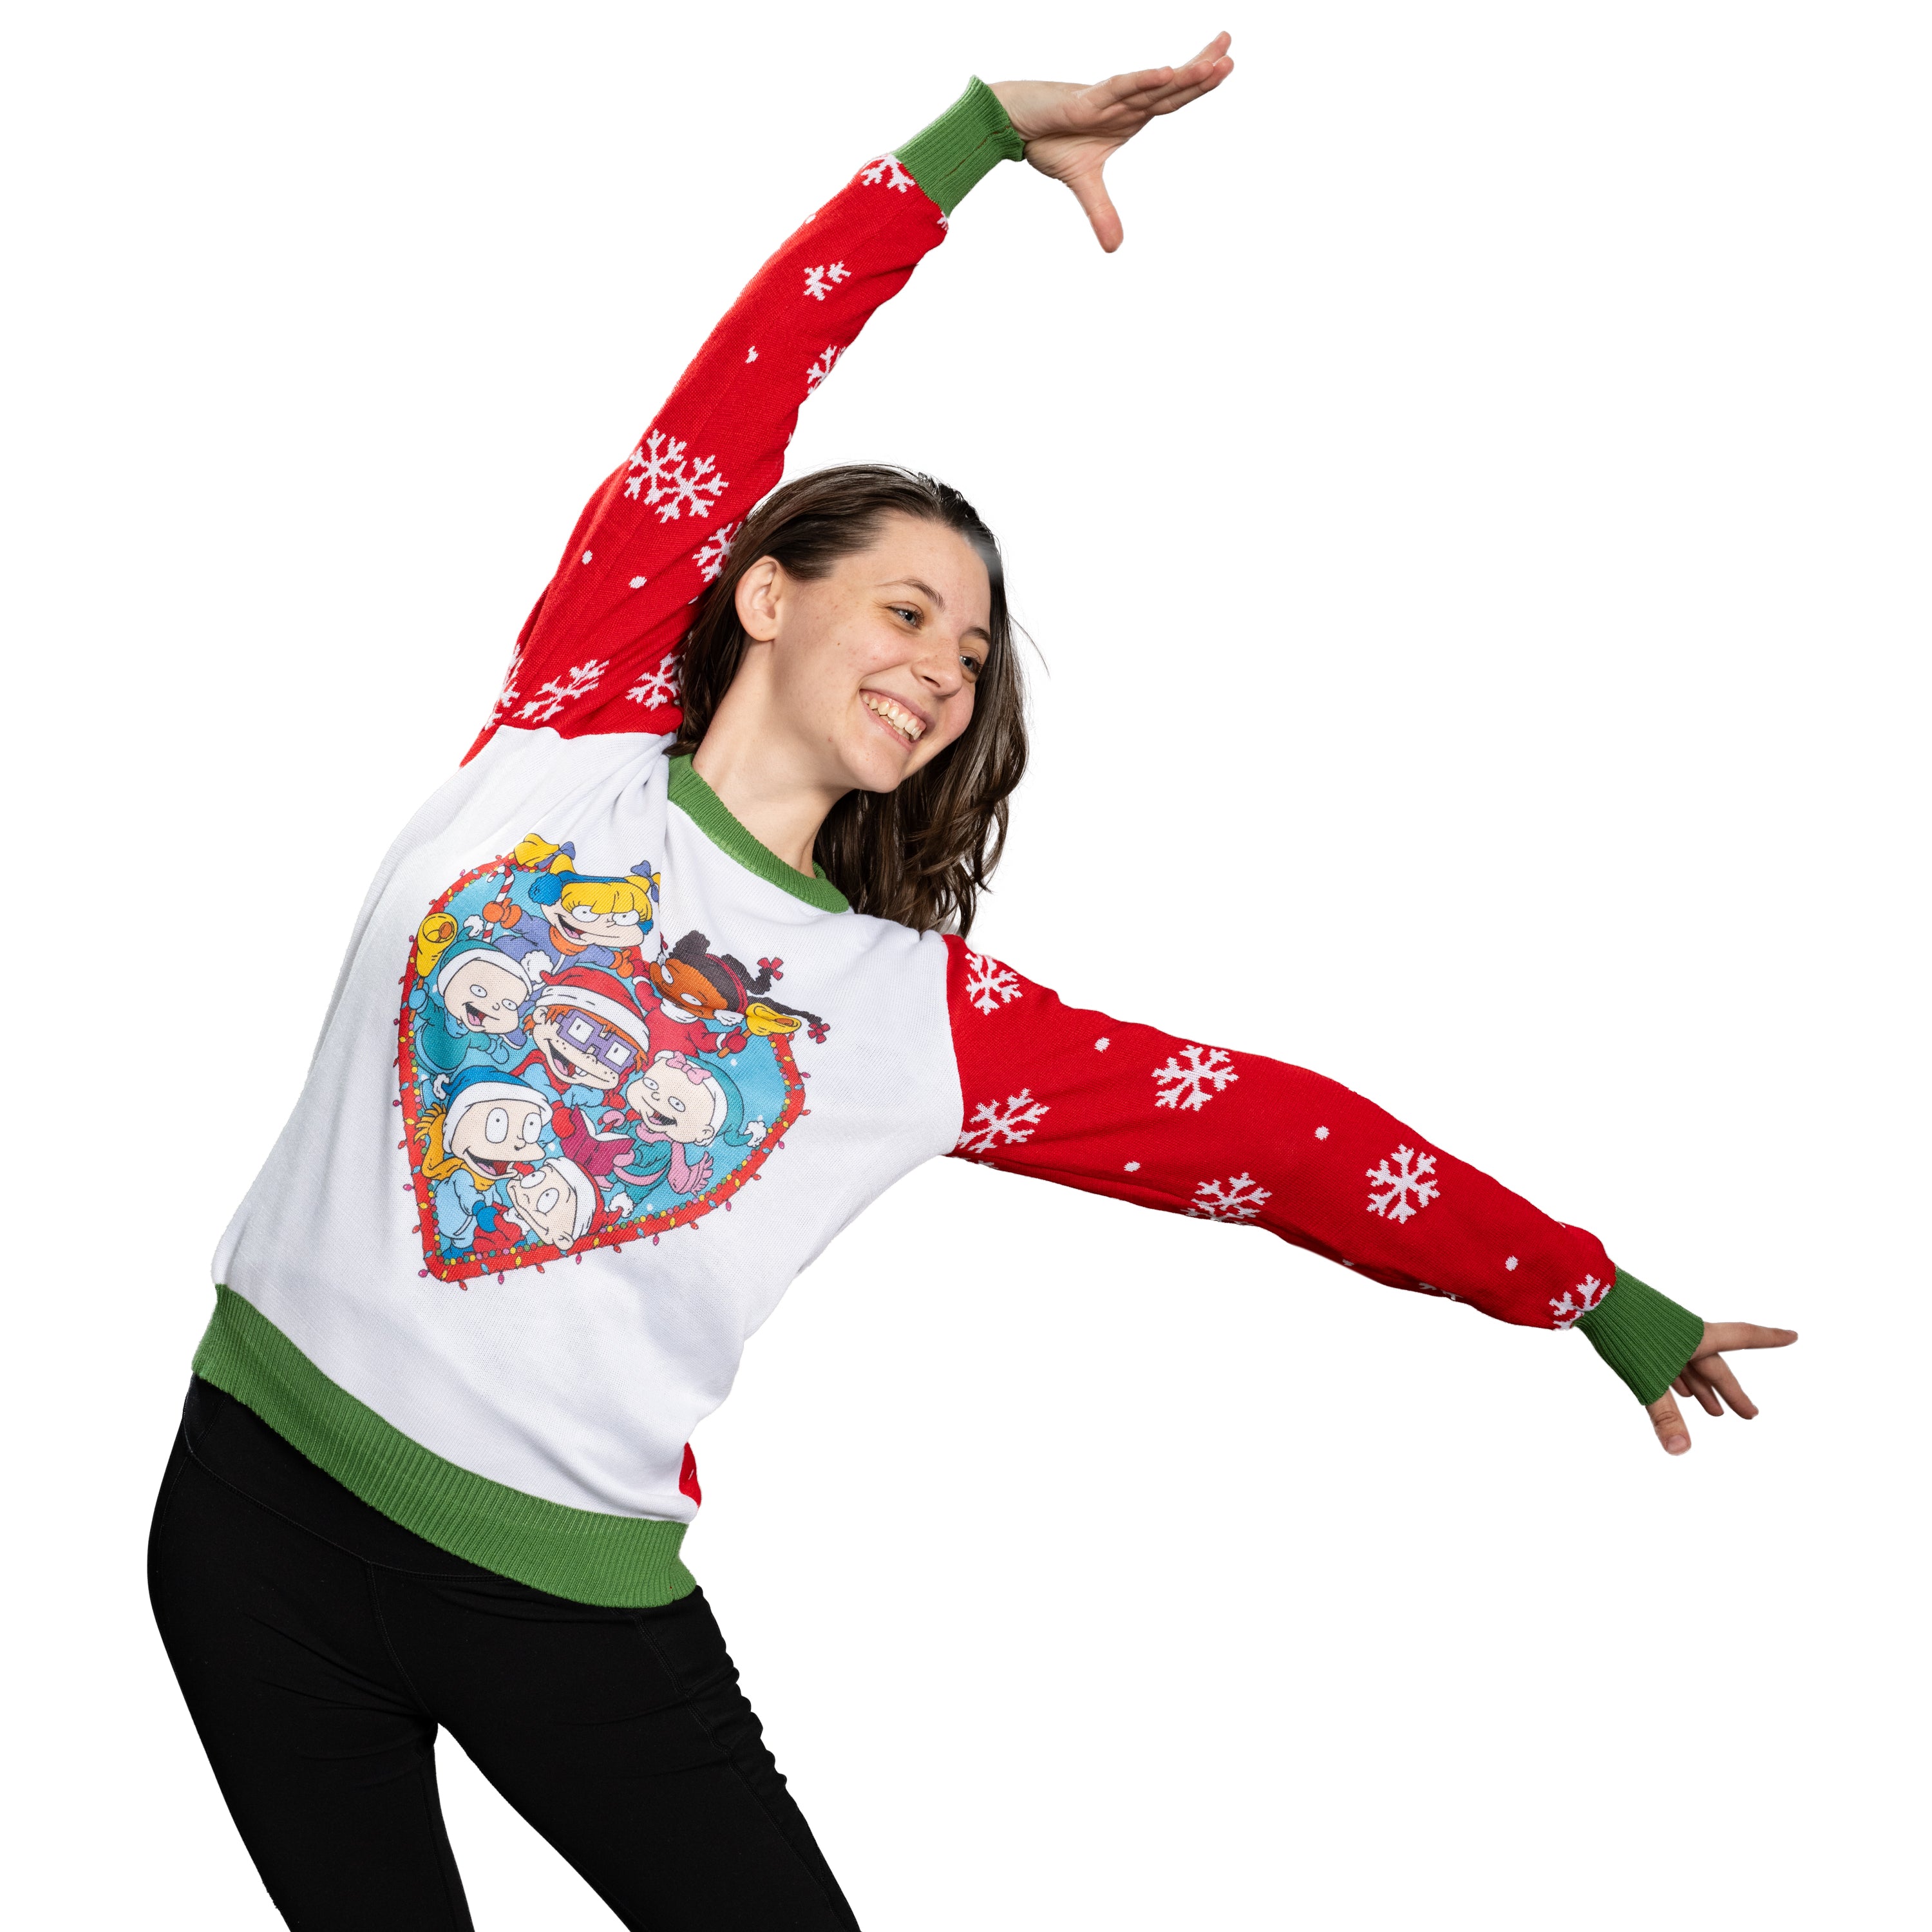 Rugrats "Winter Love" Christmas Sweater